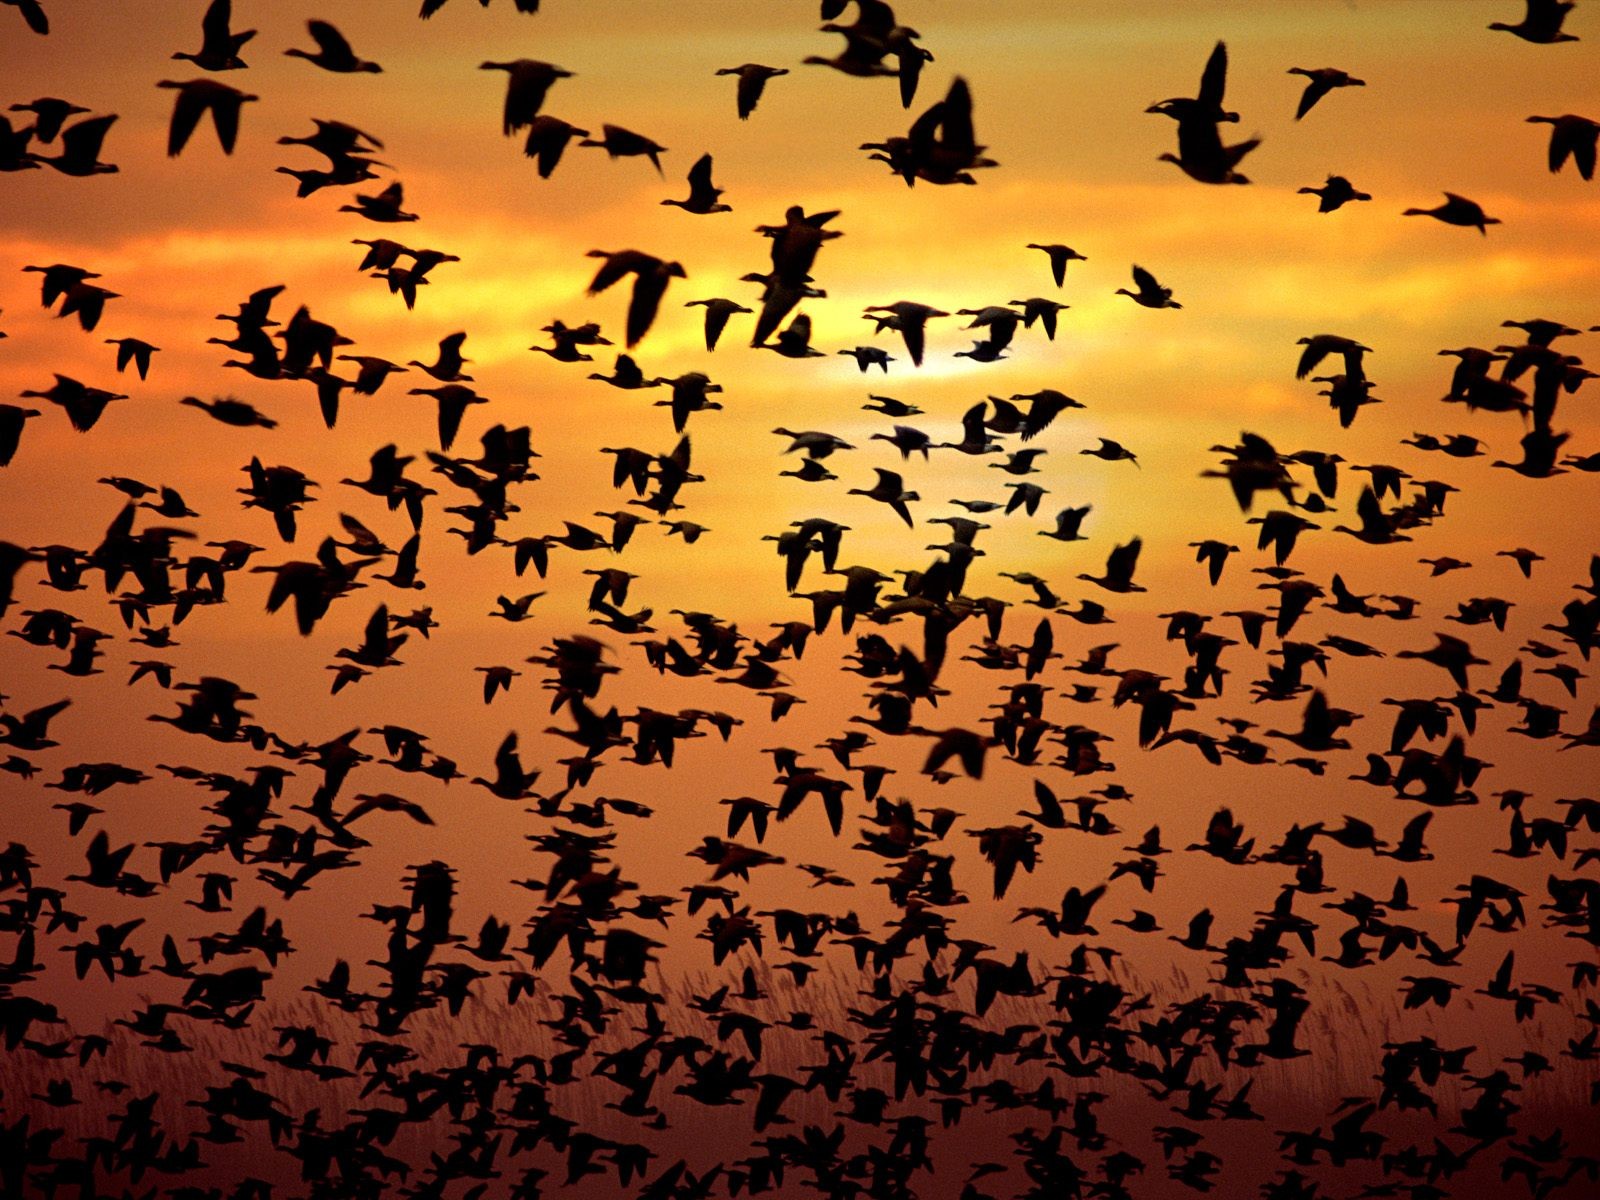 sunrise, Flying, Birds, Flock, Silhouettes, Skyscapes Wallpaper